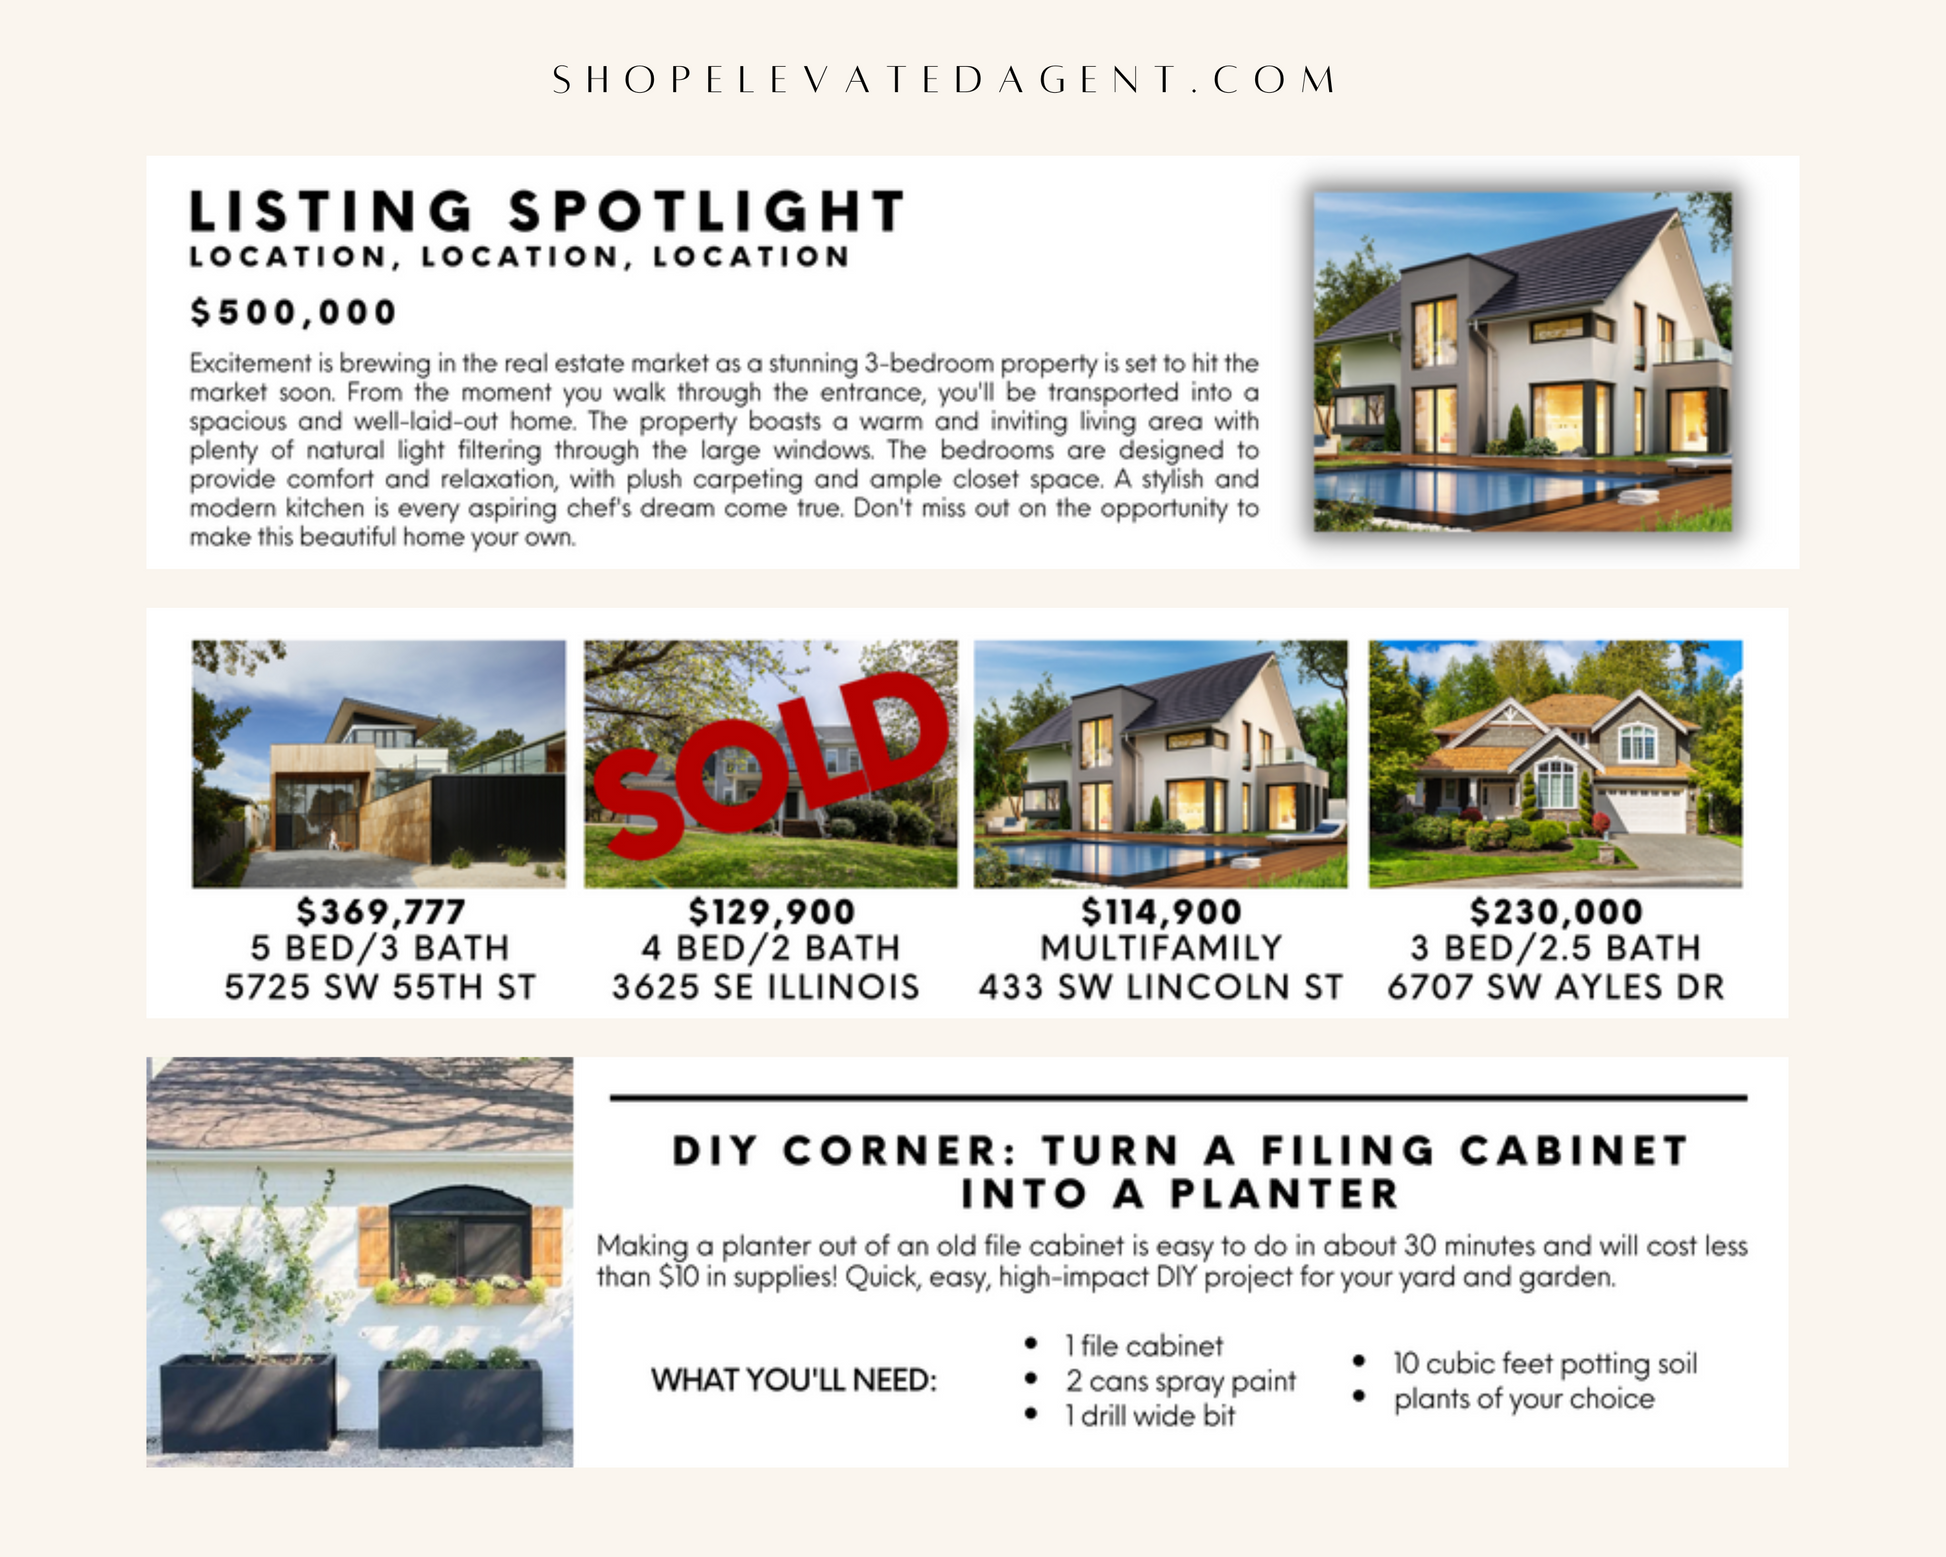 June Email Newsletter Template, June 2023 Email Real Estate Newsletter, Newsletters for Real Estate, Summer Newsletter, Farming Newsletters